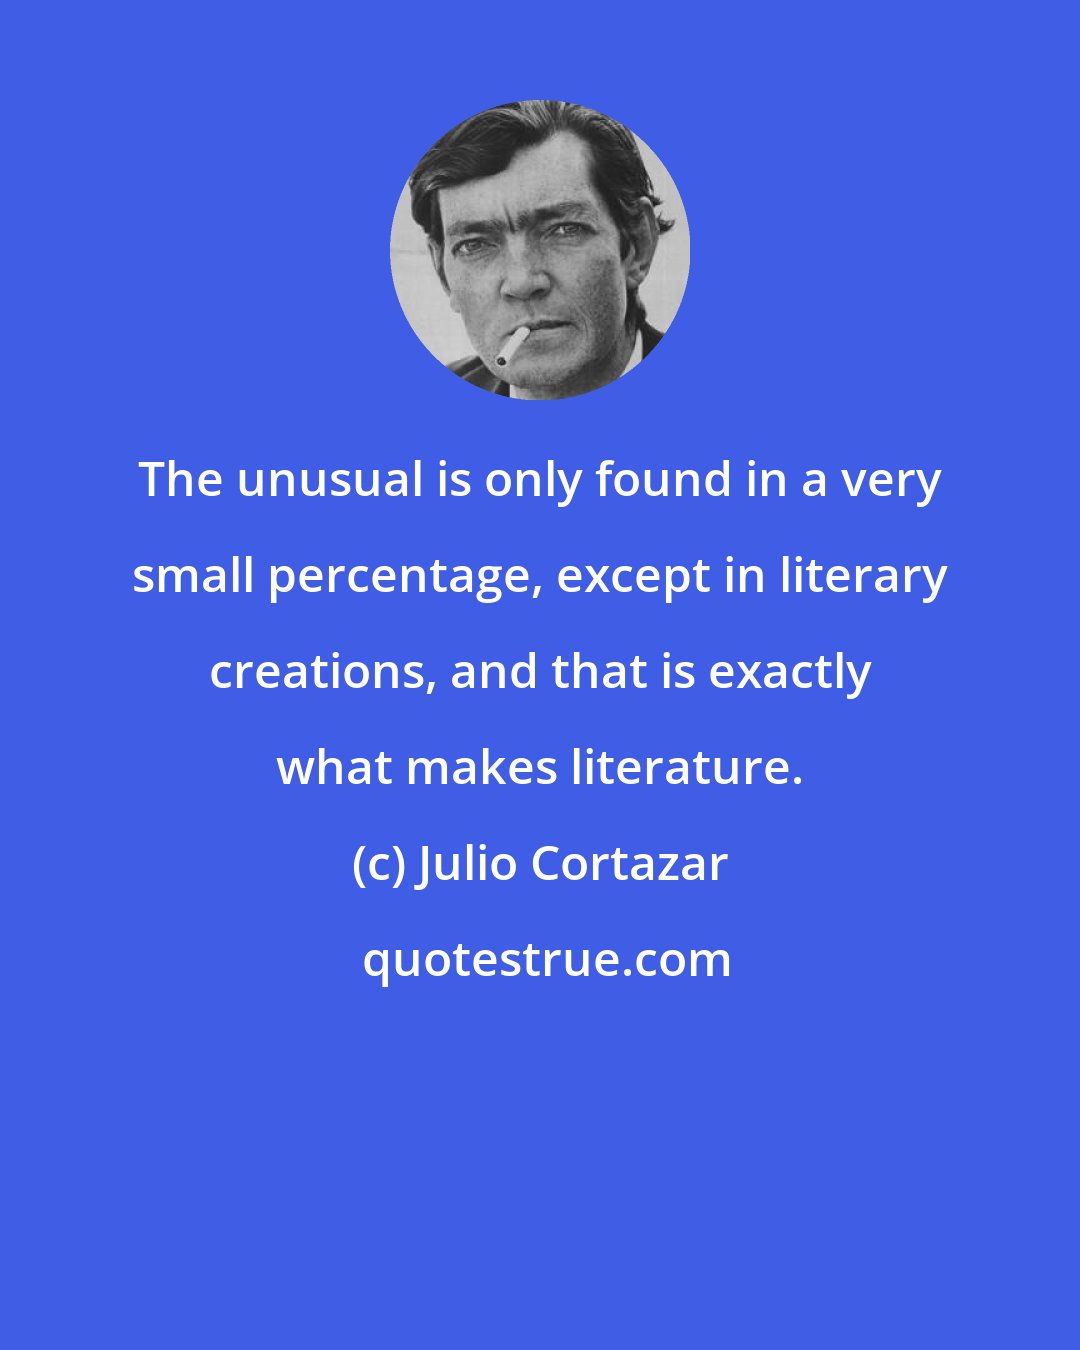 Julio Cortazar: The unusual is only found in a very small percentage, except in literary creations, and that is exactly what makes literature.